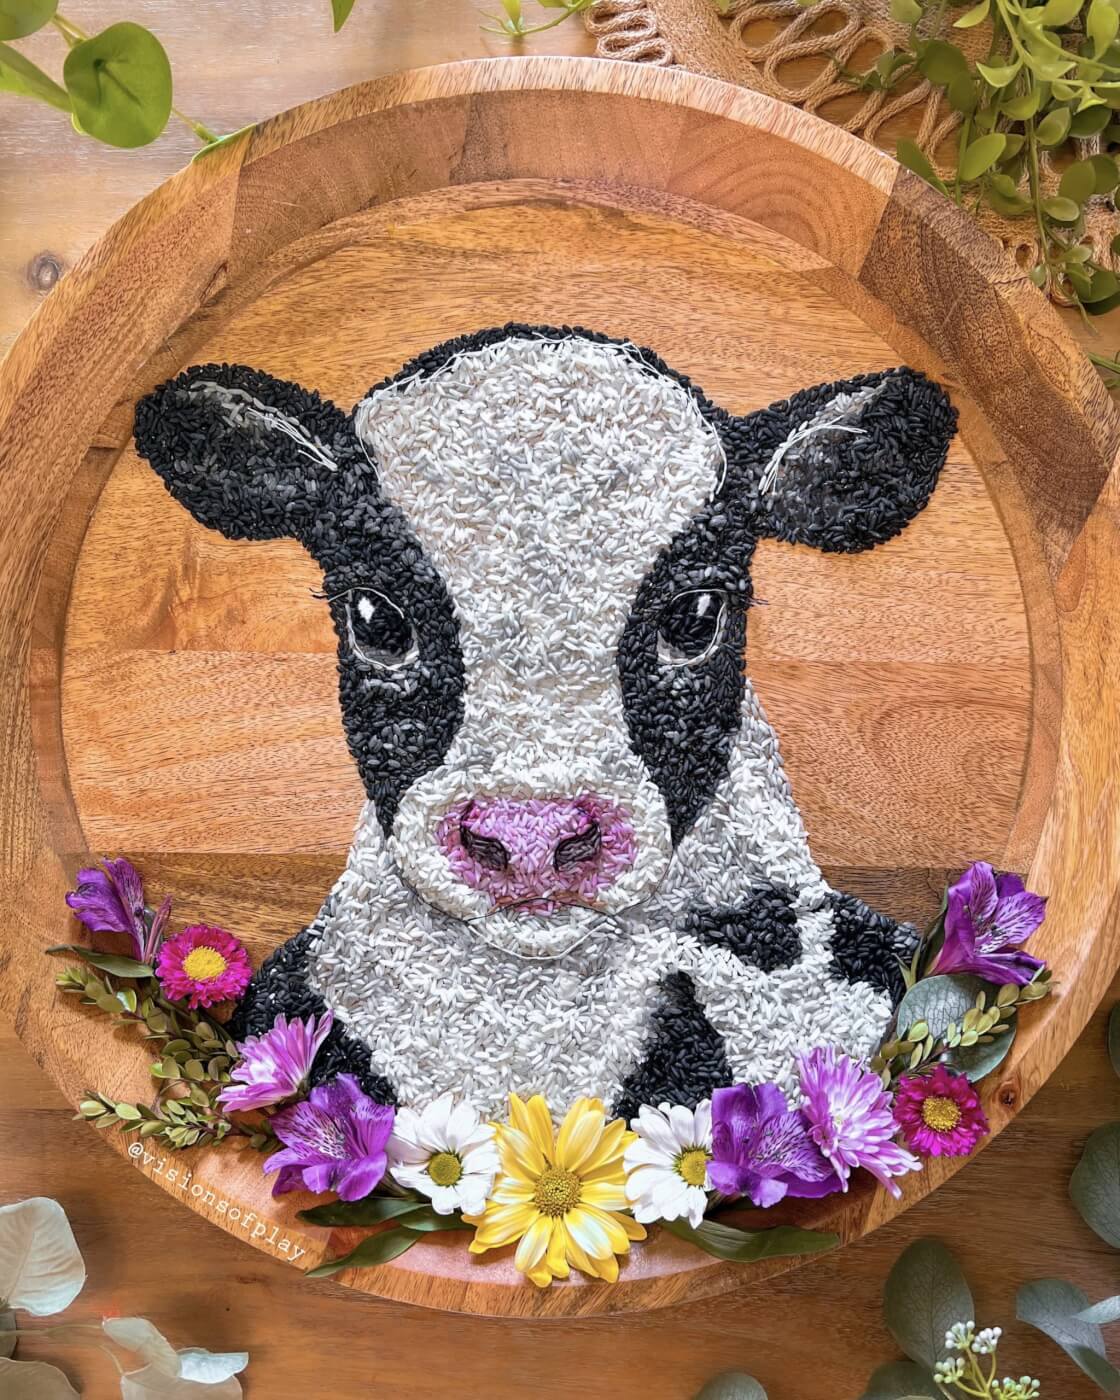 black and white cow made of rice surrounded by flowers on a wooden plate